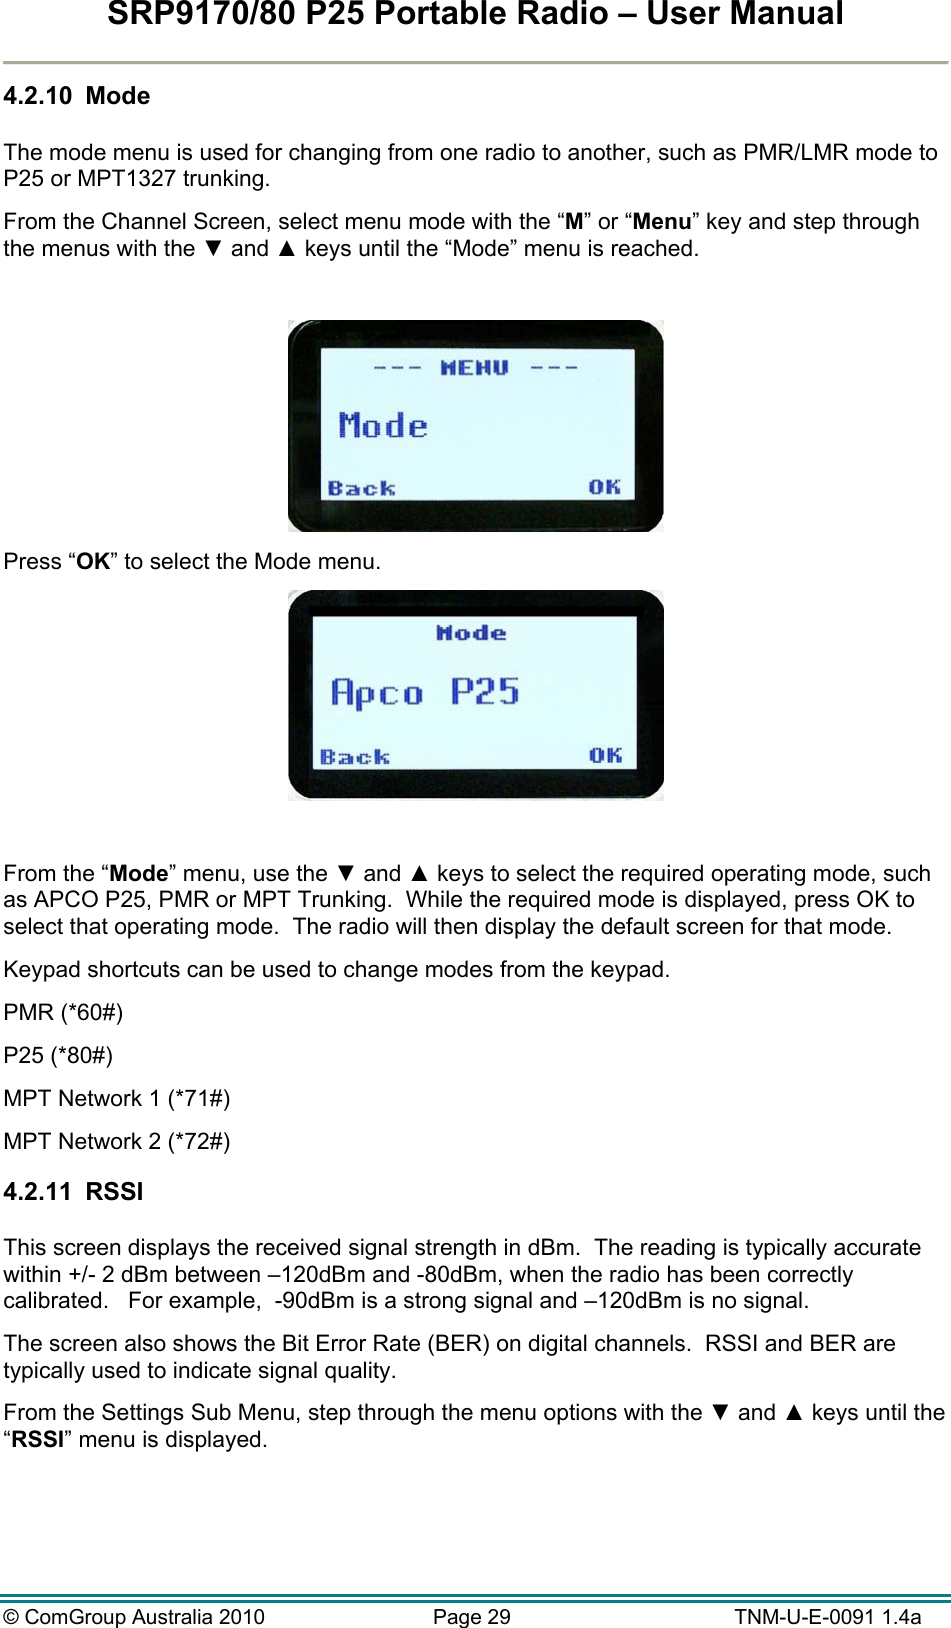 SRP9170/80 P25 Portable Radio – User Manual  © ComGroup Australia 2010  Page 29   TNM-U-E-0091 1.4a 4.2.10  Mode  The mode menu is used for changing from one radio to another, such as PMR/LMR mode to P25 or MPT1327 trunking. From the Channel Screen, select menu mode with the “M” or “Menu” key and step through the menus with the ▼ and ▲ keys until the “Mode” menu is reached.   Press “OK” to select the Mode menu.   From the “Mode” menu, use the ▼ and ▲ keys to select the required operating mode, such as APCO P25, PMR or MPT Trunking.  While the required mode is displayed, press OK to select that operating mode.  The radio will then display the default screen for that mode. Keypad shortcuts can be used to change modes from the keypad.   PMR (*60#) P25 (*80#) MPT Network 1 (*71#) MPT Network 2 (*72#) 4.2.11  RSSI  This screen displays the received signal strength in dBm.  The reading is typically accurate within +/- 2 dBm between –120dBm and -80dBm, when the radio has been correctly calibrated.   For example,  -90dBm is a strong signal and –120dBm is no signal. The screen also shows the Bit Error Rate (BER) on digital channels.  RSSI and BER are typically used to indicate signal quality. From the Settings Sub Menu, step through the menu options with the ▼ and ▲ keys until the “RSSI” menu is displayed.  